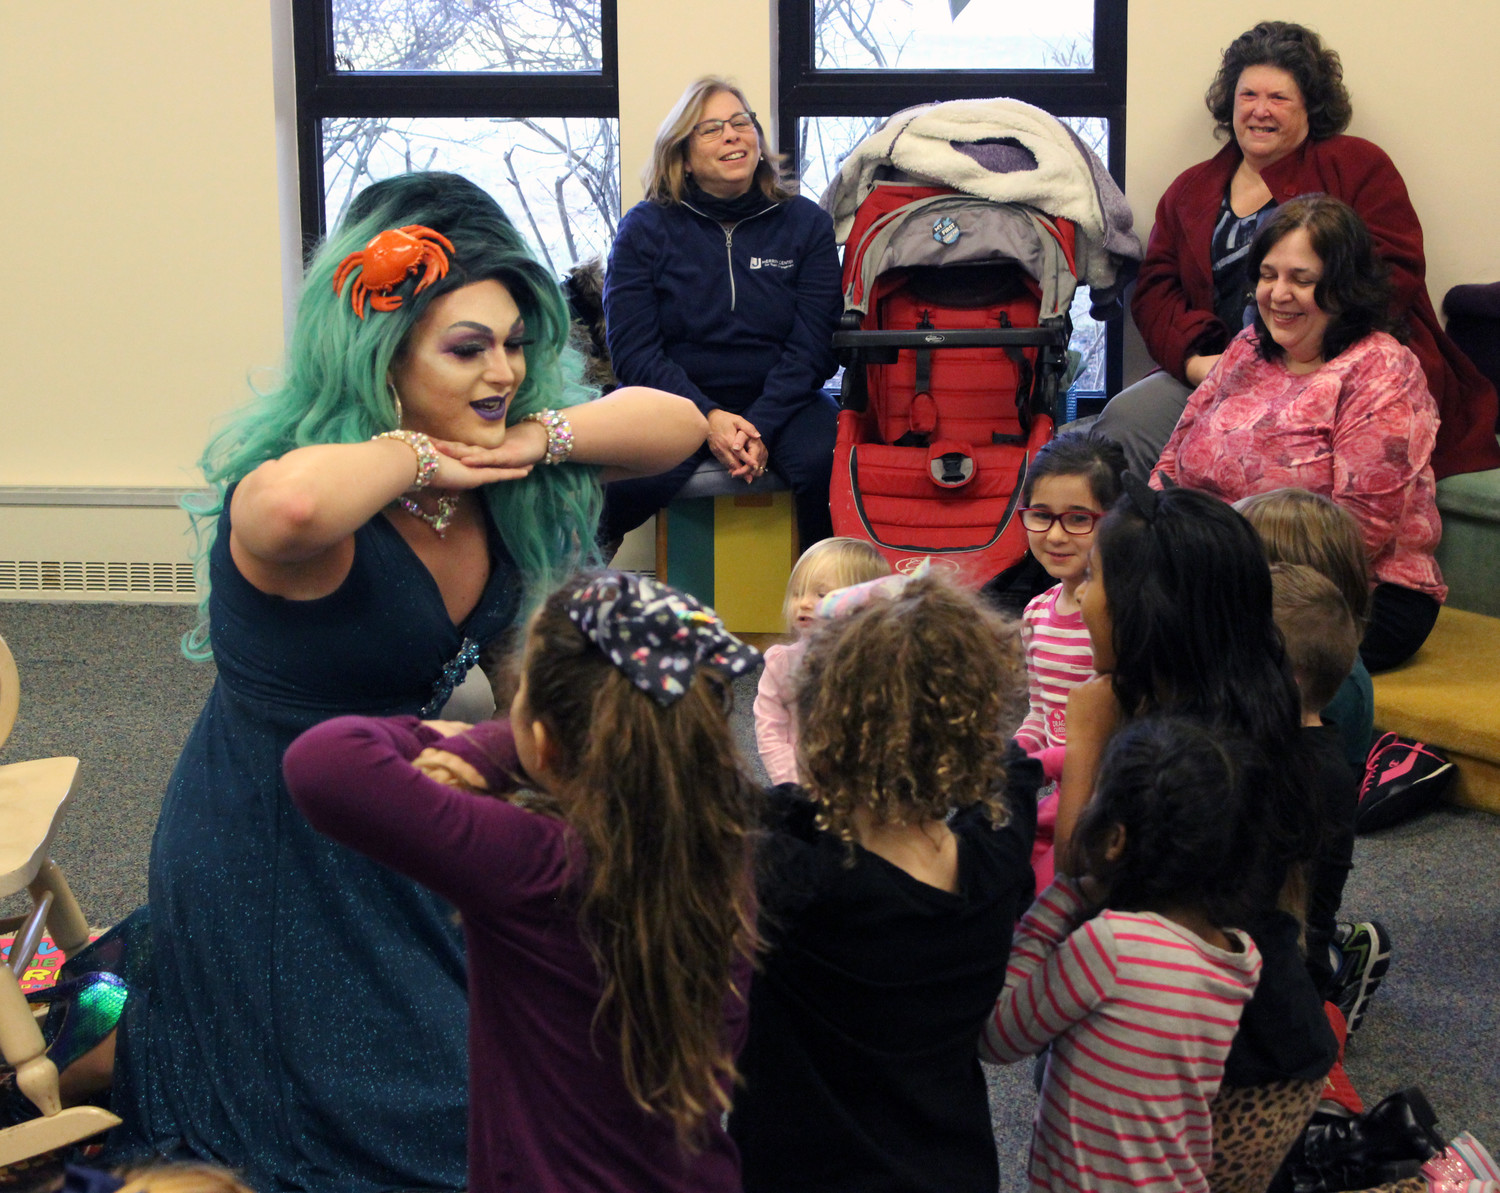 Manhattan-based drag queen Bella Noche made like a mermaid with children who attended the Drag Queen Story Hour at the East Meadow Public Library last Saturday.